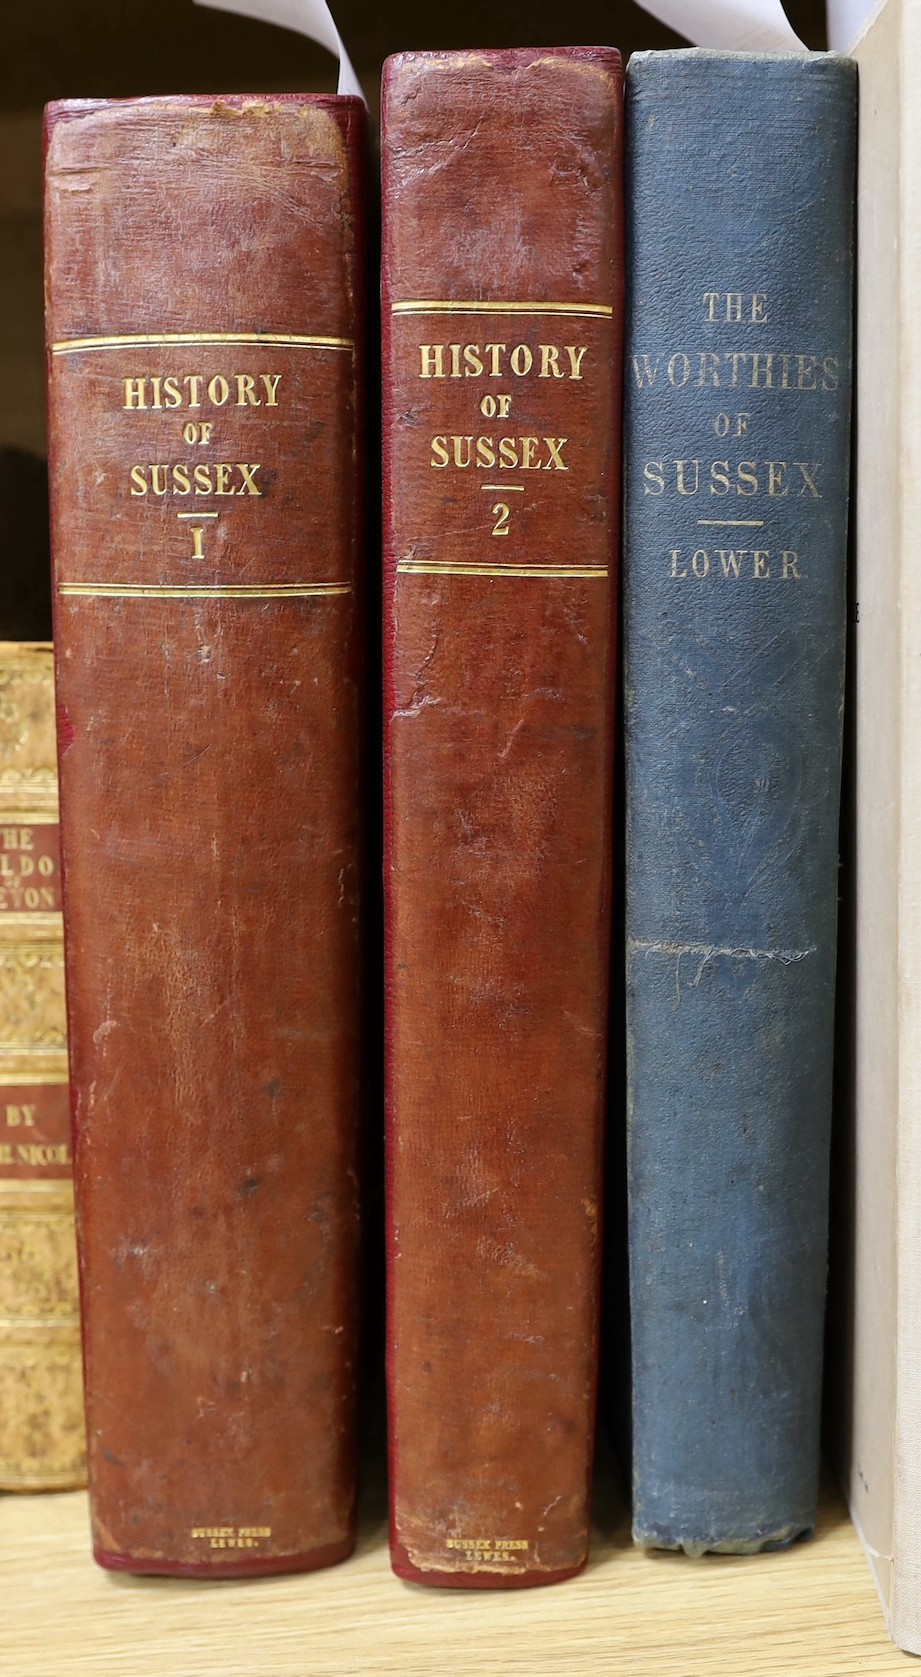 Horsfield, Thomas Walker - The History, Antiquities, and Topography of the County of Sussex, 2 vols, 4to, half red morocco, with 2 folded maps, 1 only portrait frontis (to vol 2) and 54 plates, Baxter, Lewes, 1835 and Lo